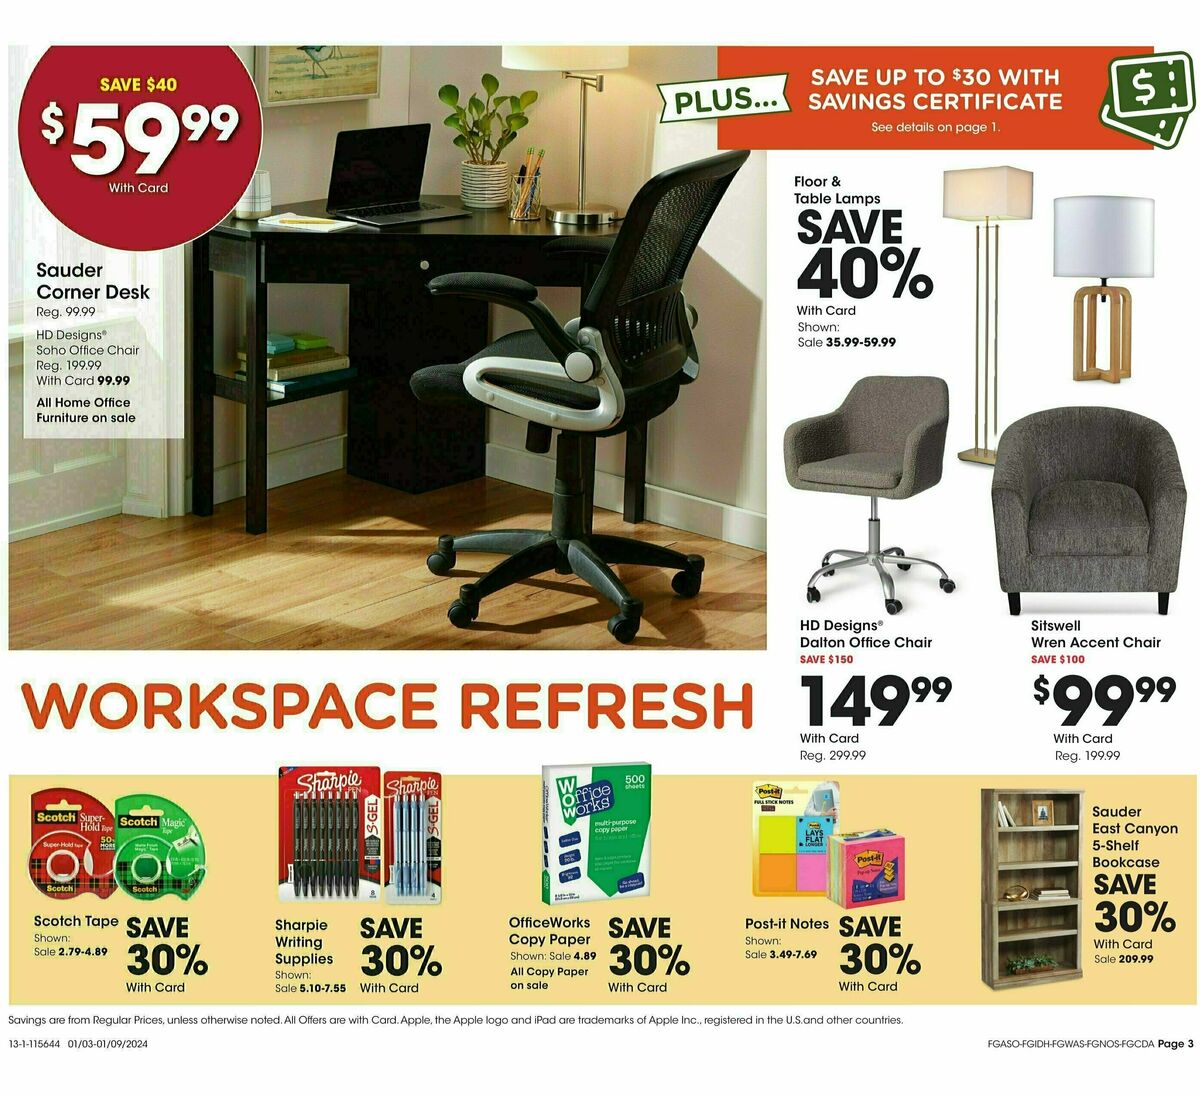 Fred Meyer Ship to Home Weekly Ad from January 3